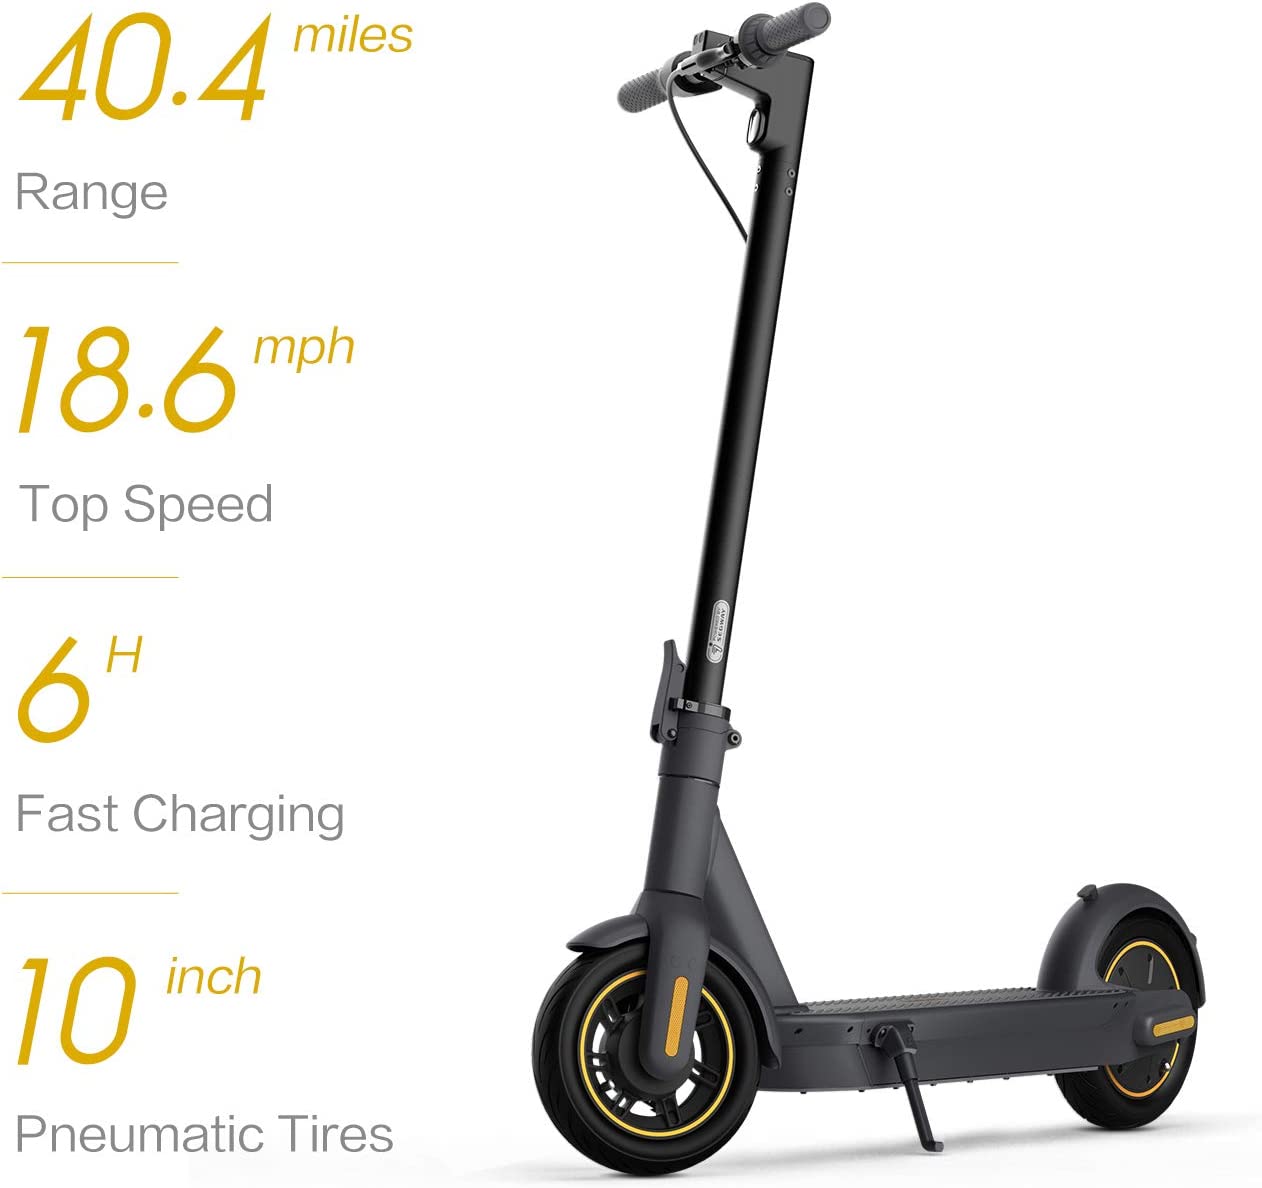 Segway Ninebot MAX G30P Electric Kick Scooter, 350W Motor, 40 Miles Long-Range & 18.6 mph, 10" Pneumatic Tire, Commuter Electric Scooter, Adults - image 3 of 12